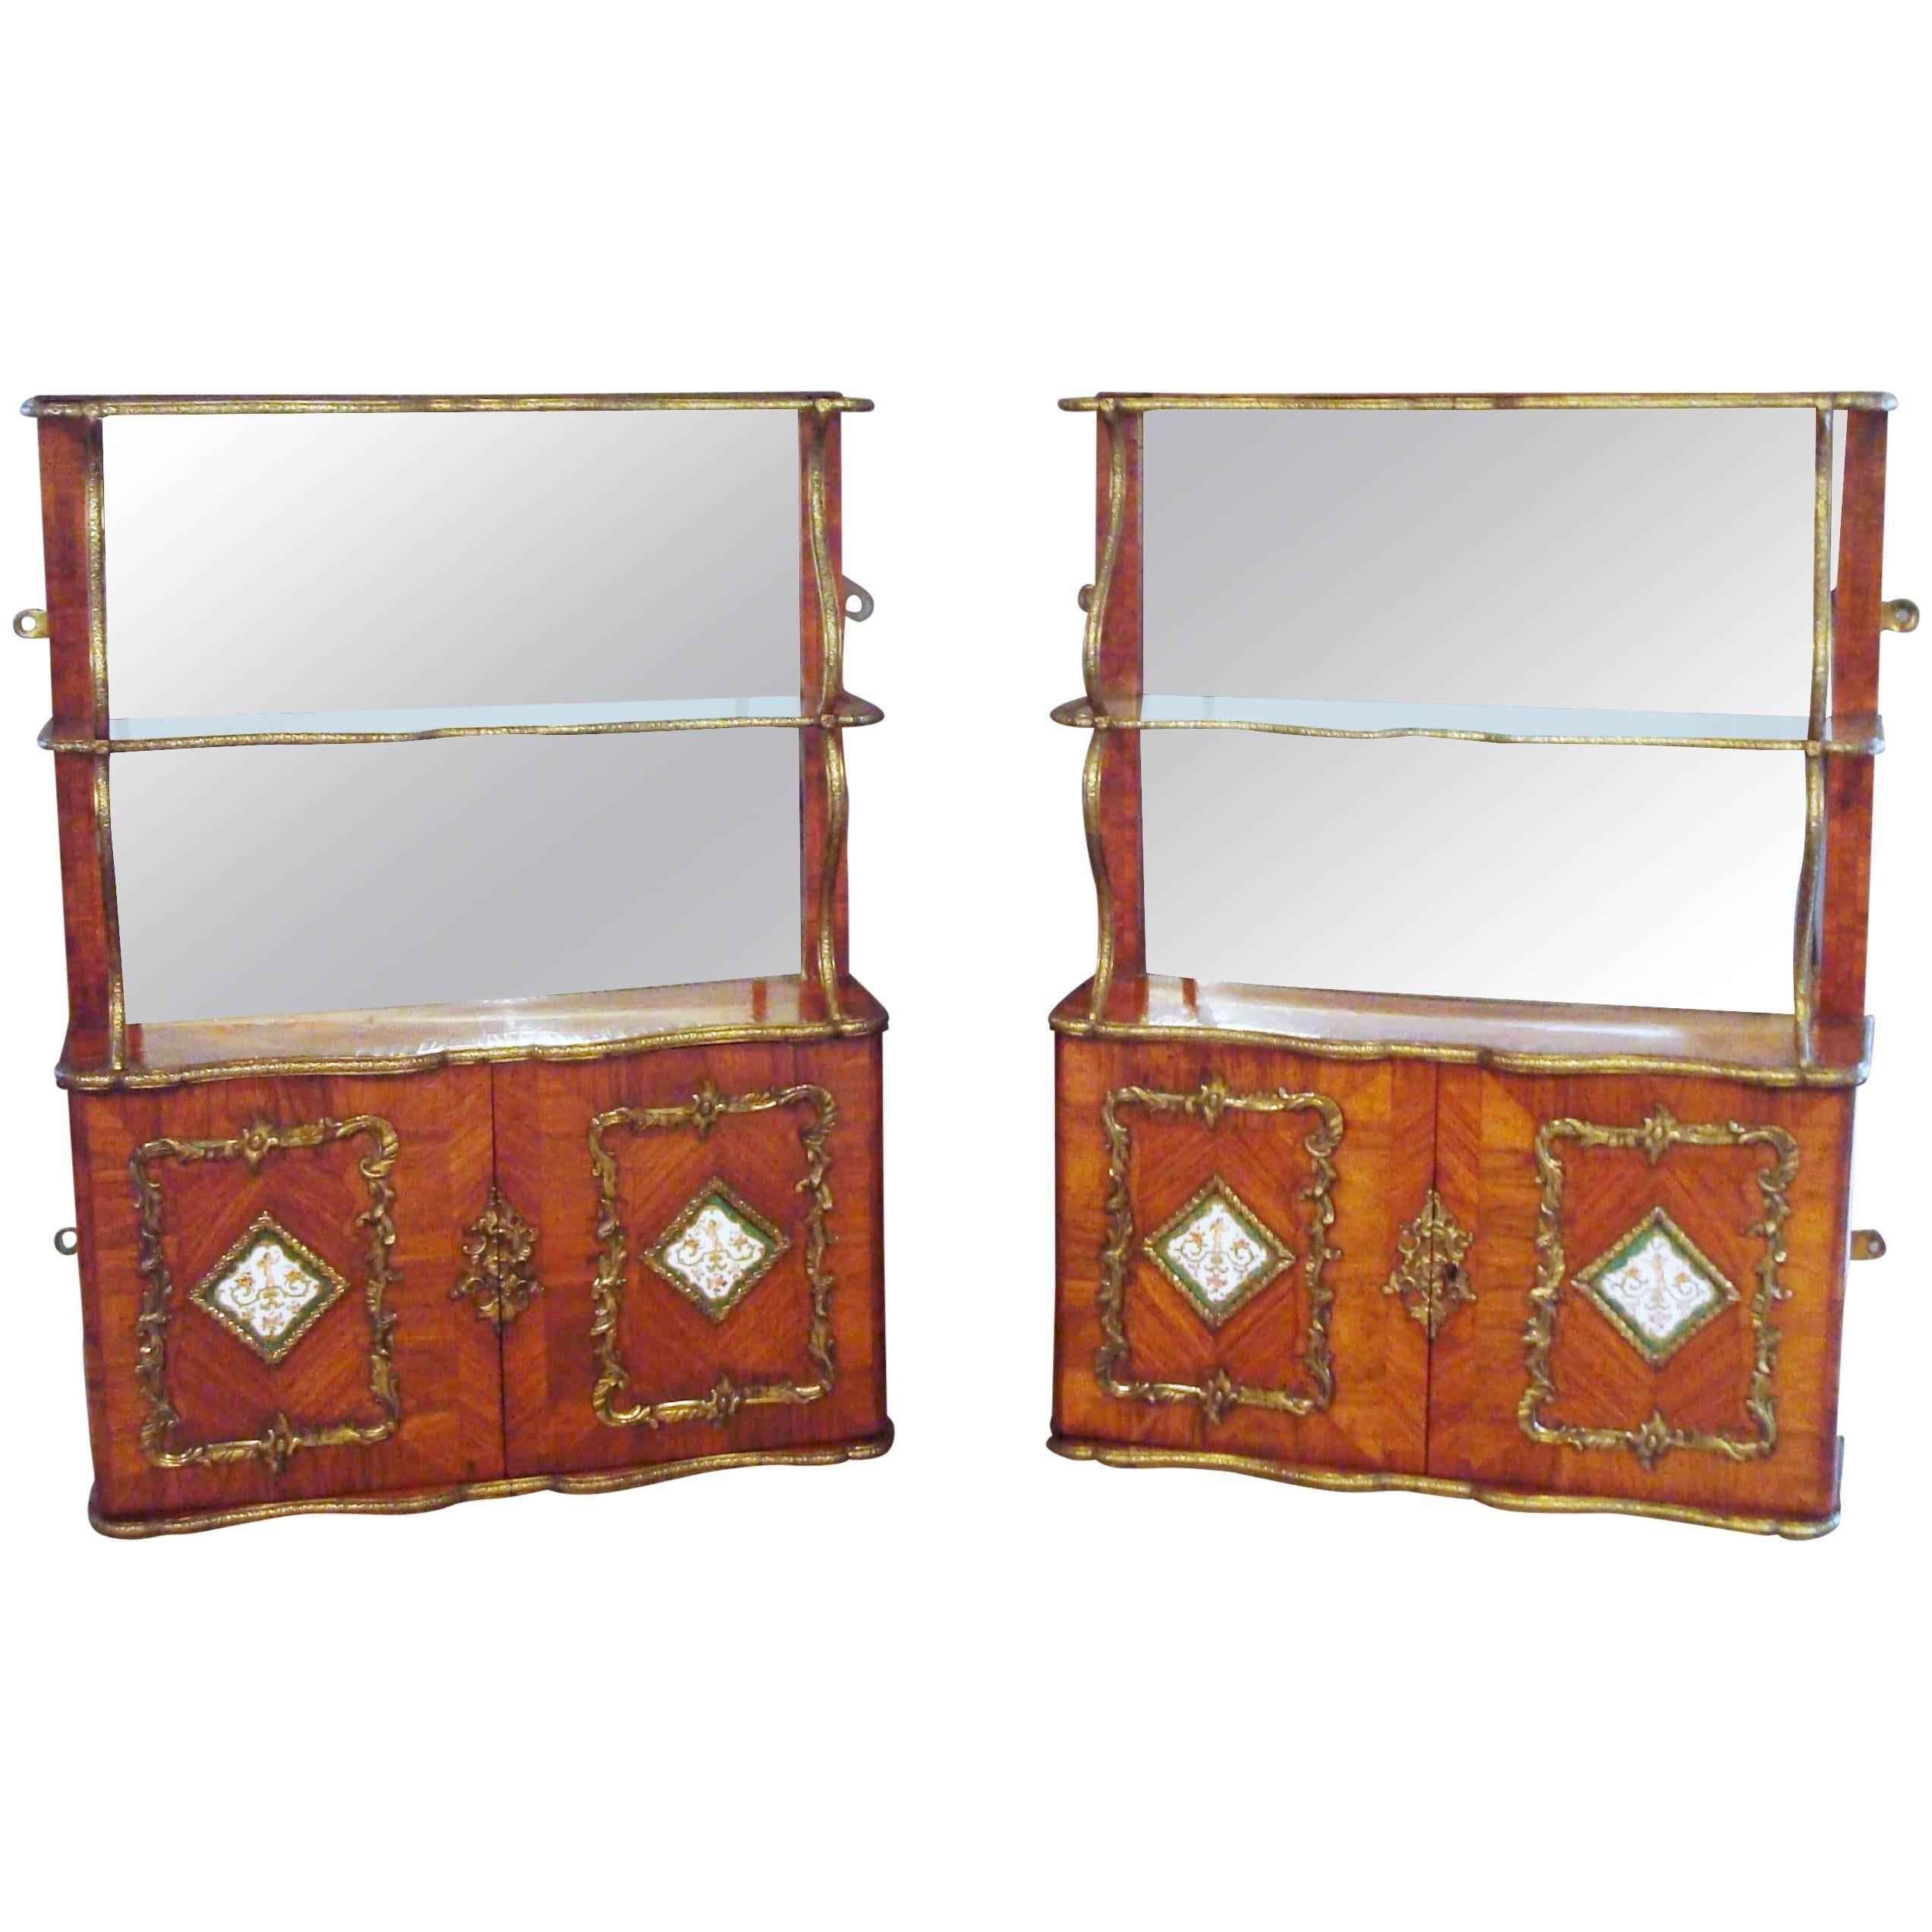 Exceptional 19th Century Pair of English Hanging Wall Cabinets by Town & Emanuel For Sale